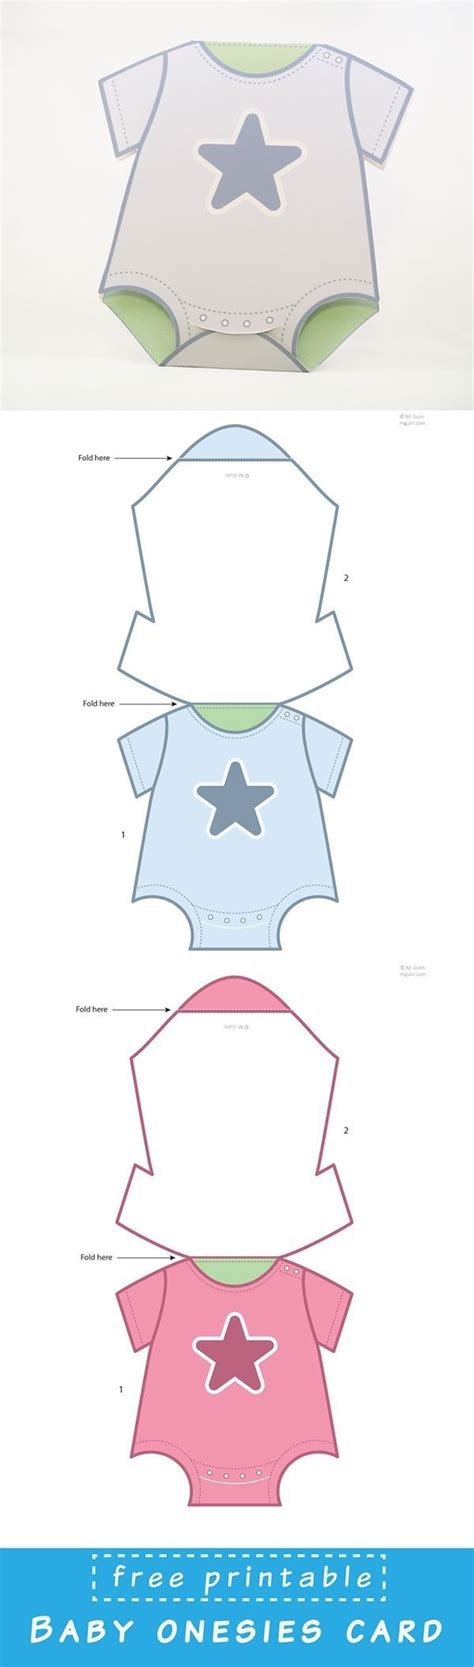 Free Printable Baby Onesies Card Template Just Dowload And Assemble